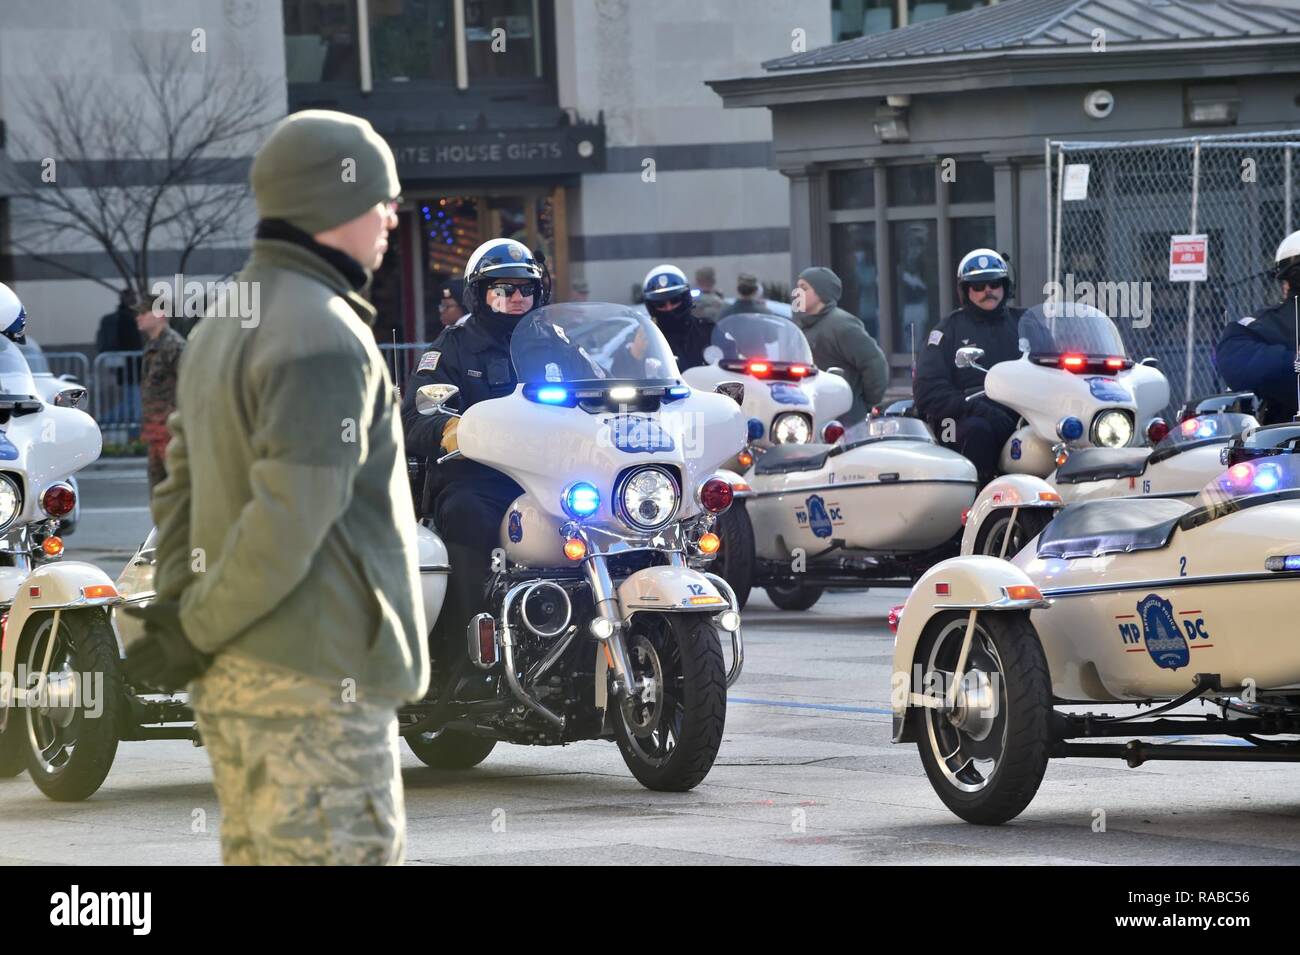 The Metropolitan Police Department of the District of Columbia leads the presidential escort on Pennsylvania Avenue during the Department of Defense rehearsal of the Inaugural parade in Washington, D.C., Jan. 15, 2017. More than 5,000 military members across from all branches of the armed forces of the United States, including Reserve and National Guard components, provided ceremonial support and Defense Support of Civil Authorities during the inaugural period. Stock Photo